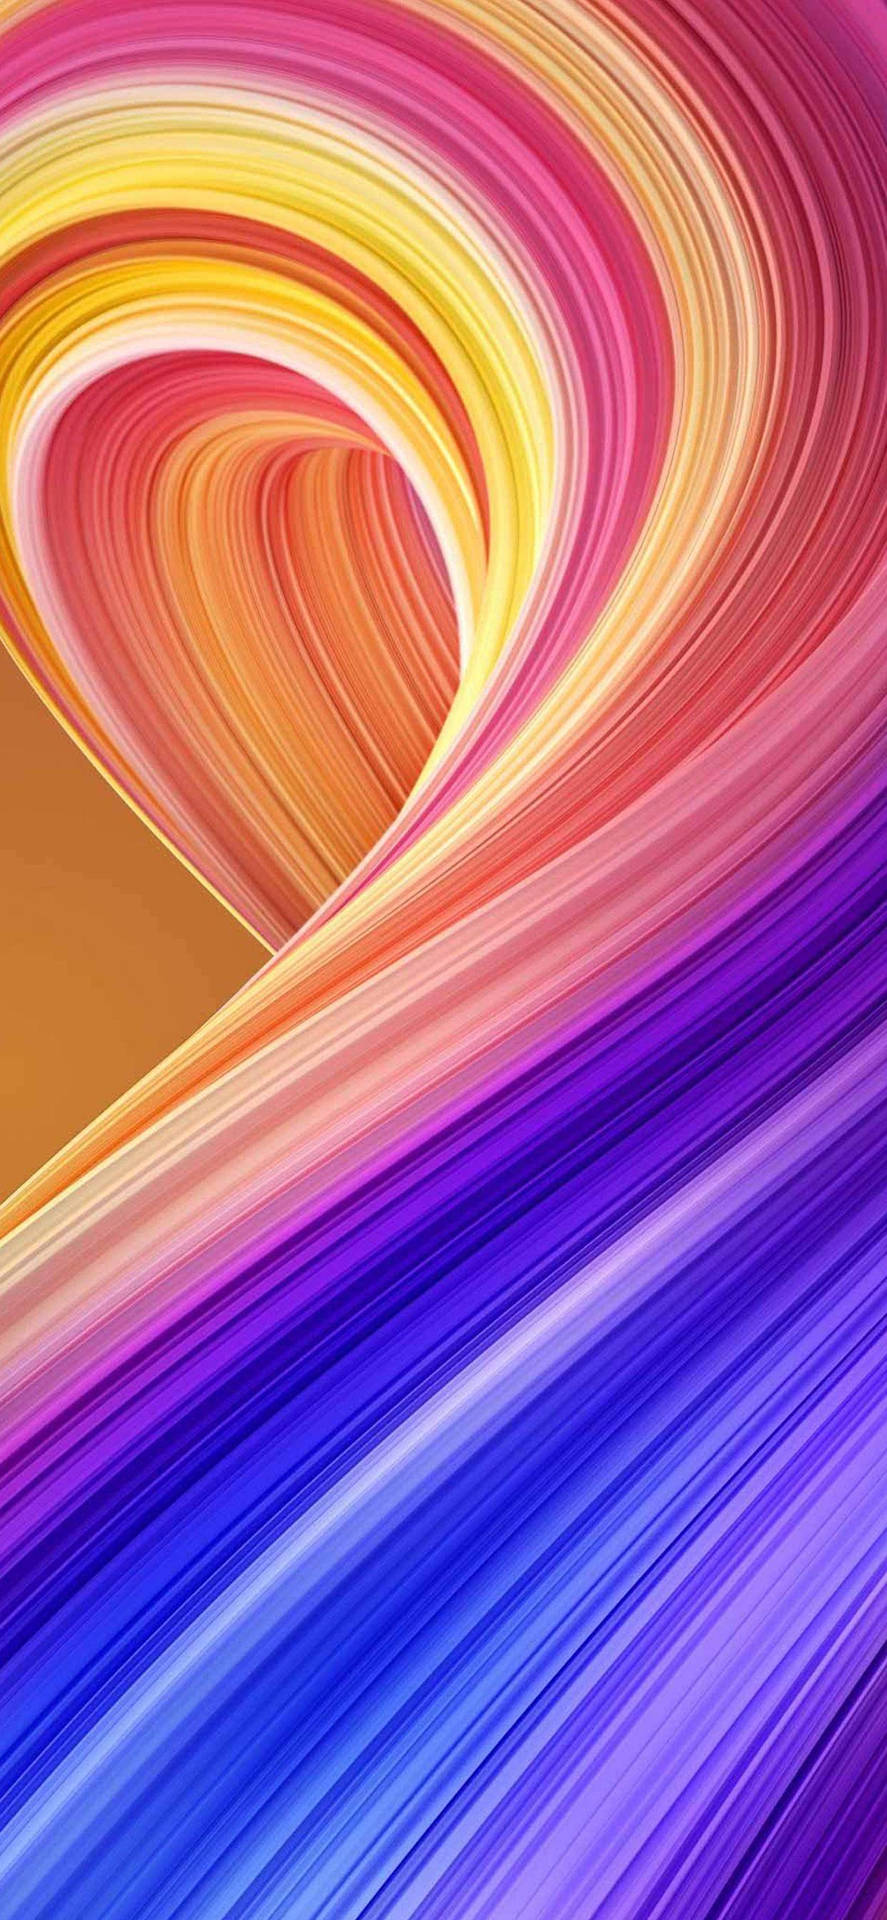 Cool Iphone Xs Max Multicolored Swirl Background